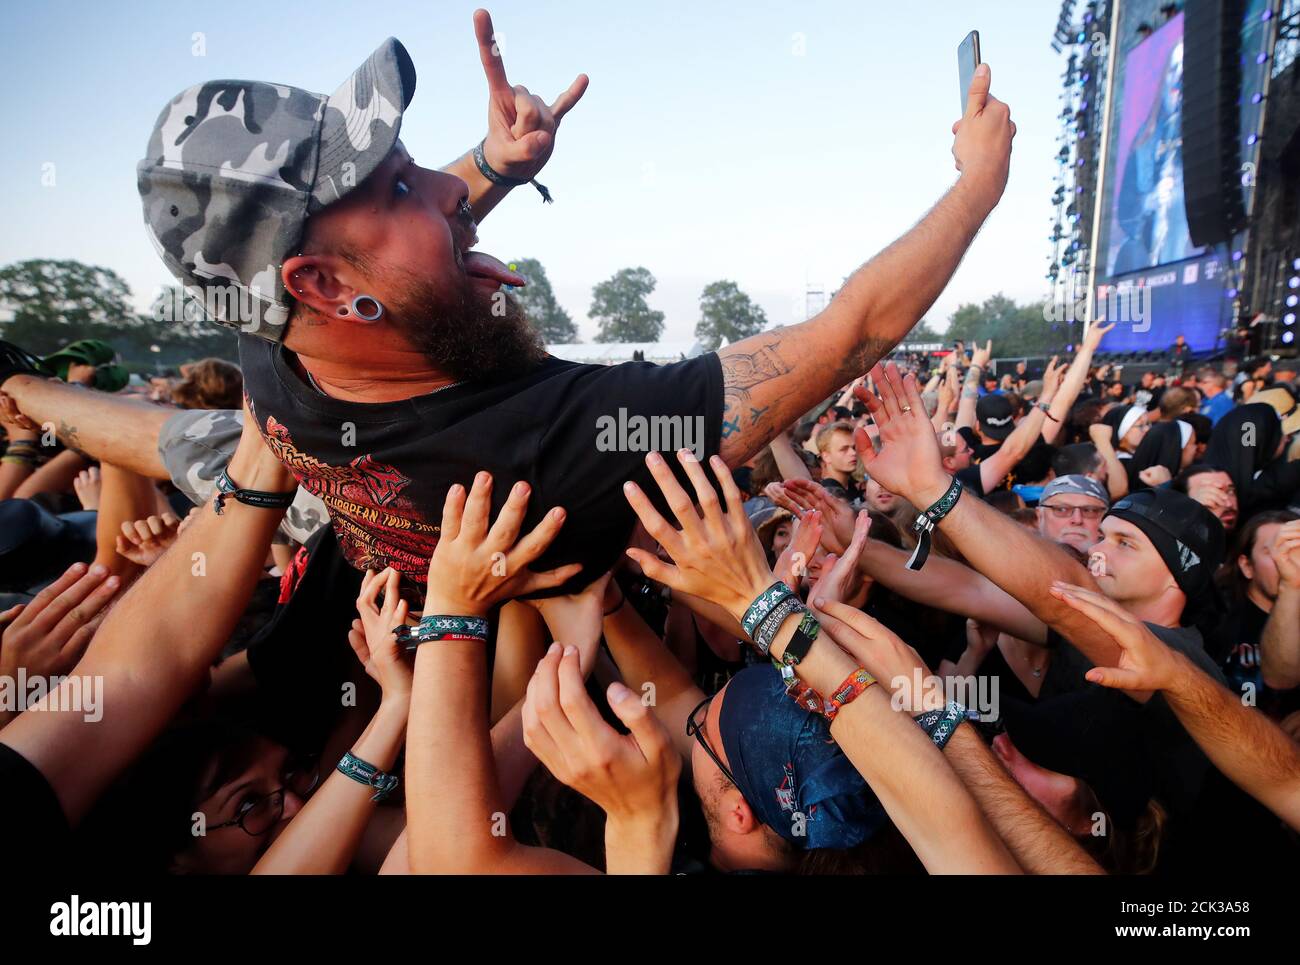 A fan takes a selfie as he surfs on top of the crowd during the performance